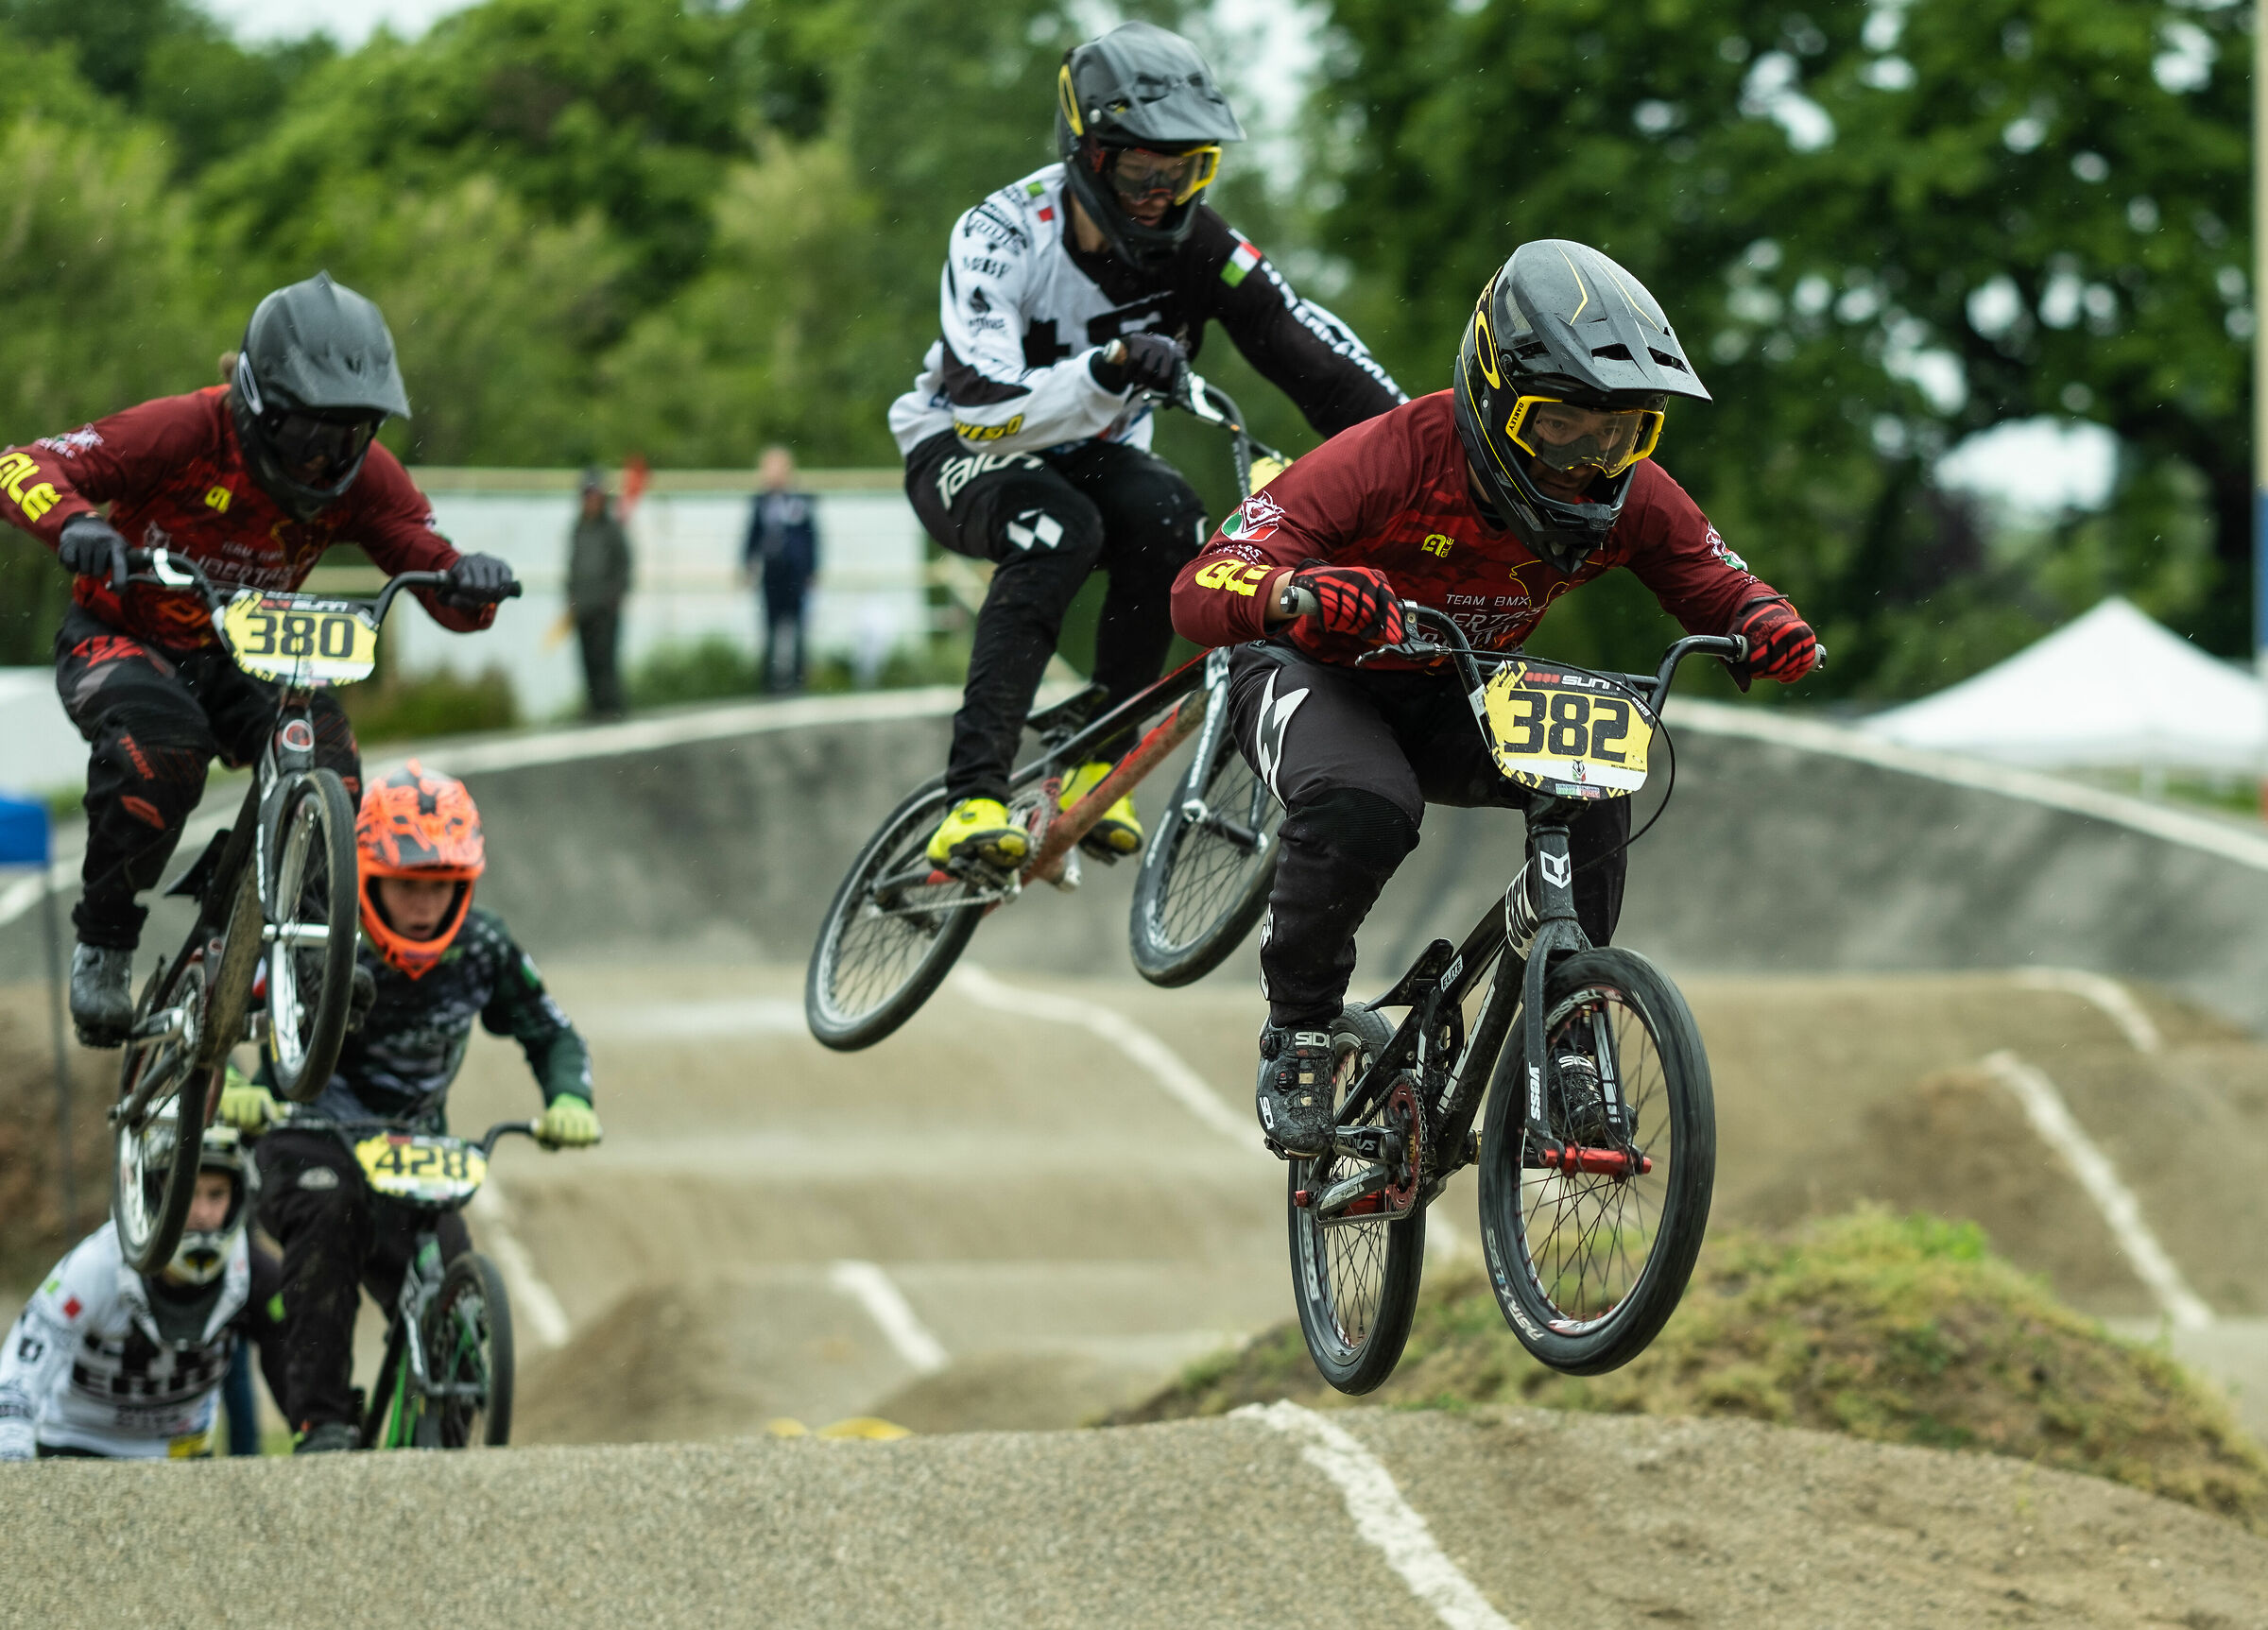 BMX in tussle...